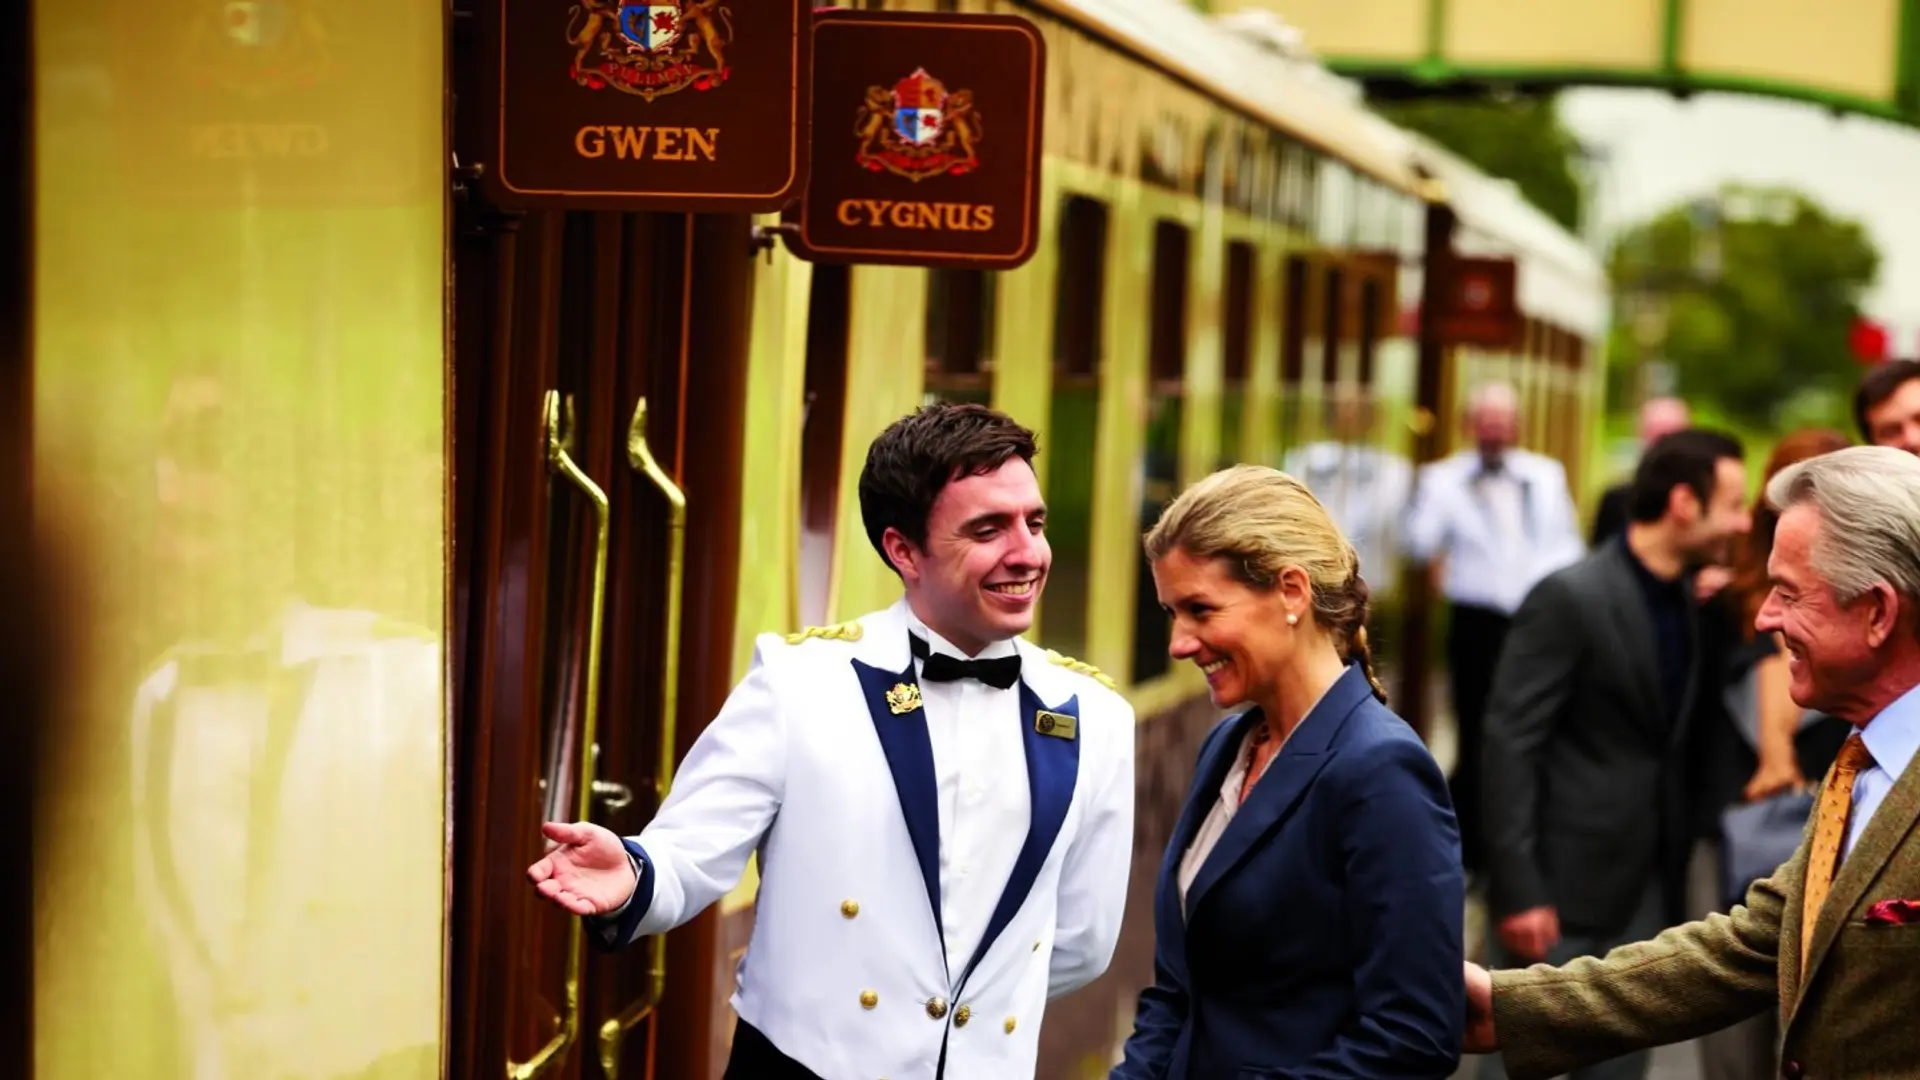 Trains Reviews - Belmond teams up with filmmaker Wes Anderson on its British Pullman train service